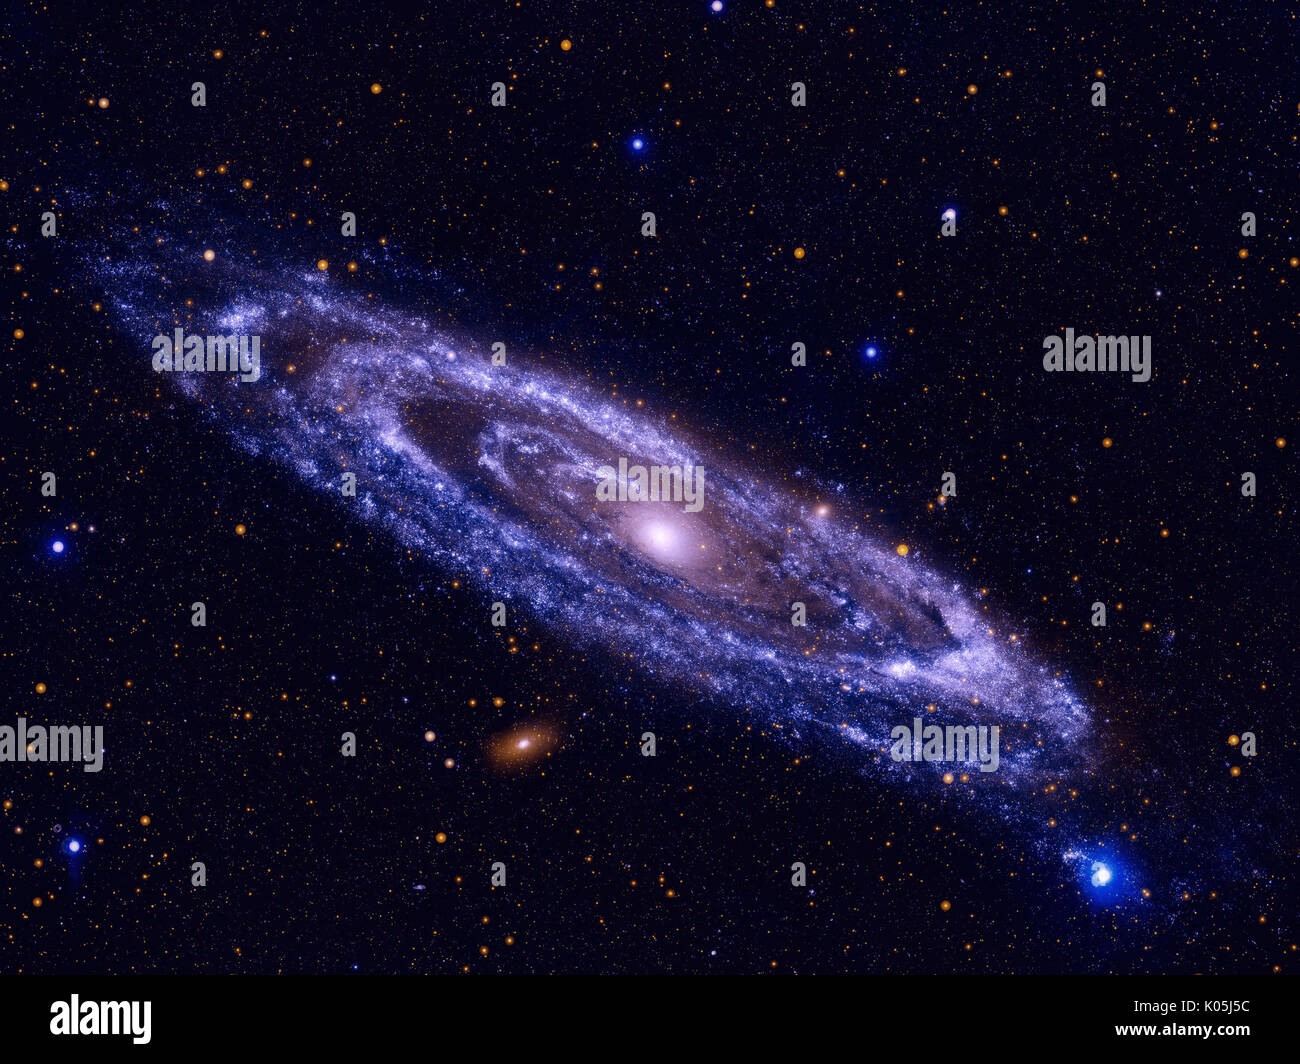 The Andromeda Galaxy, Messier 31 or M31 is a spiral galaxy in the constellation of Andromeda. It is the nearest major galaxy to the Milky Way. Retouch Stock Photo